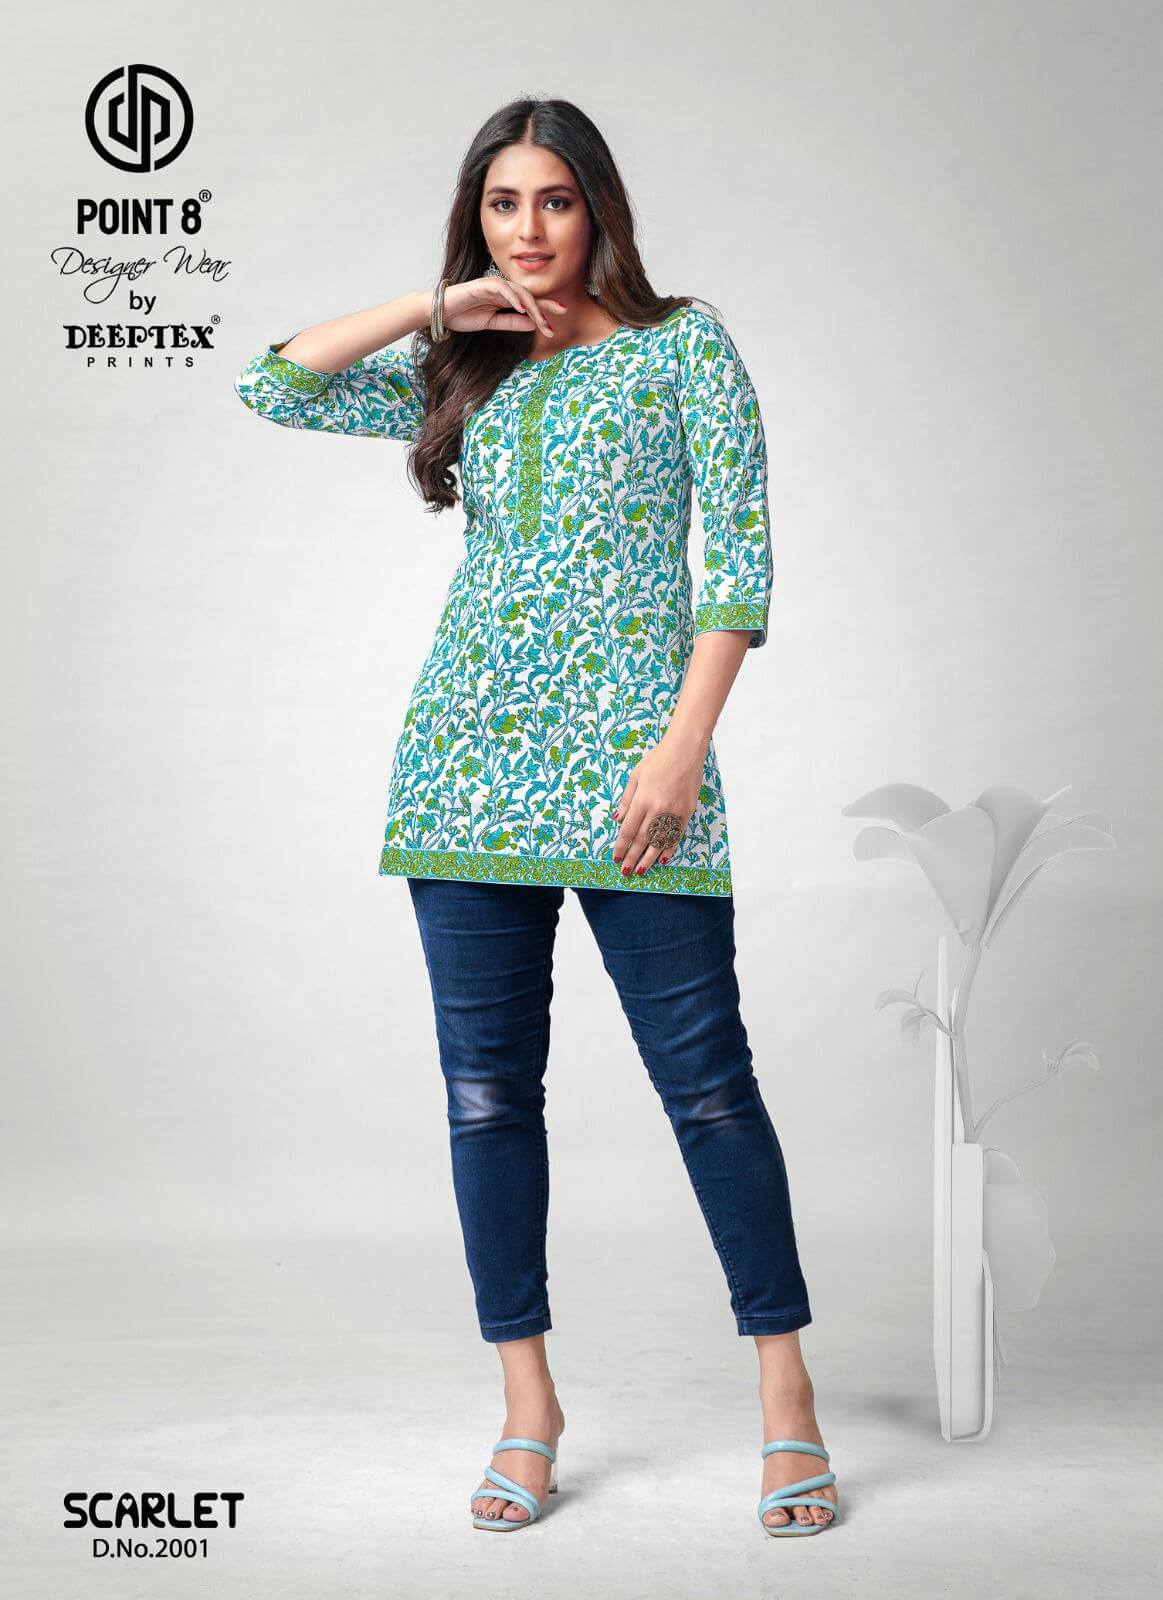 Deeptex Point 8 Scarlet vol 2 Ladies Tops Catalog collection 4